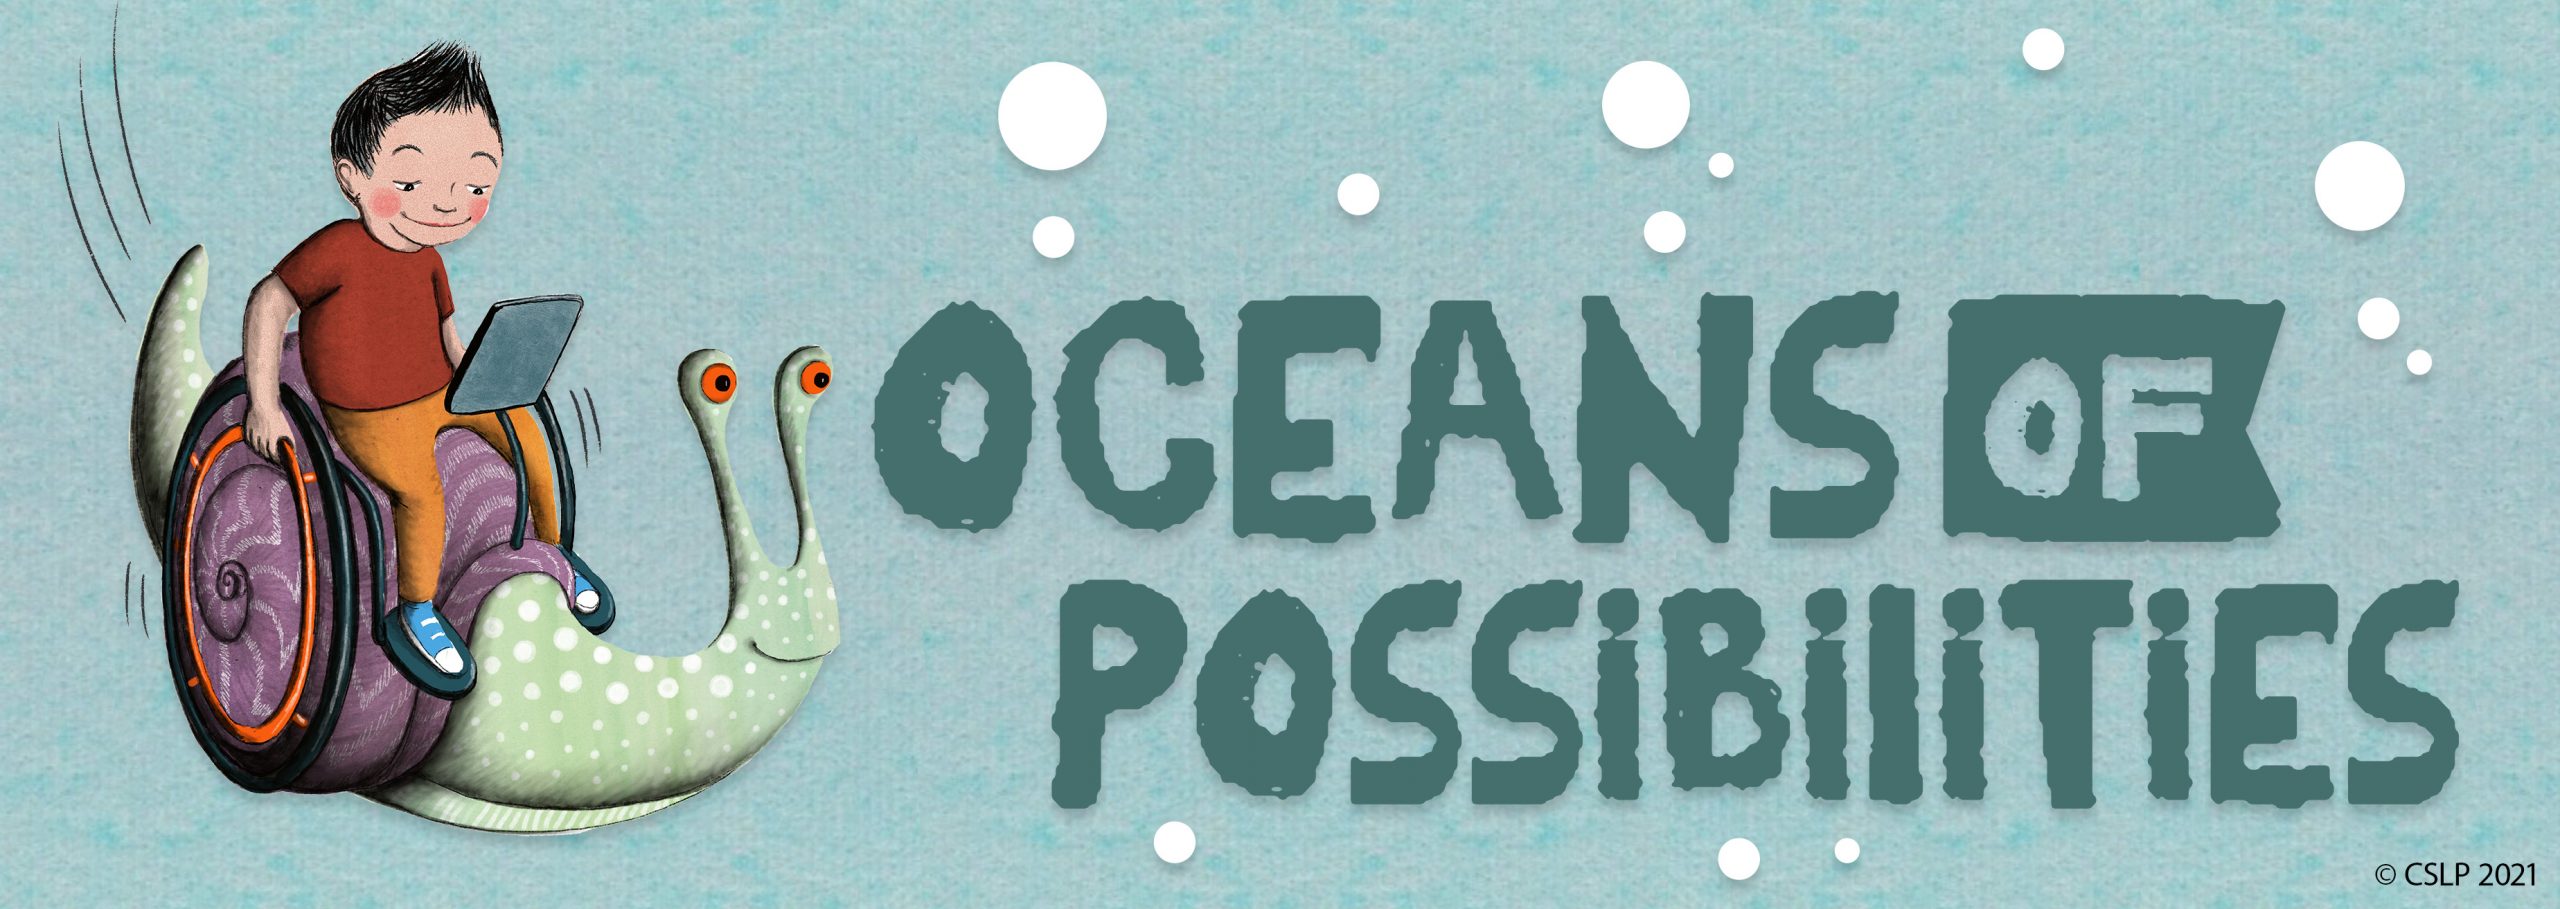 oceans of possibility